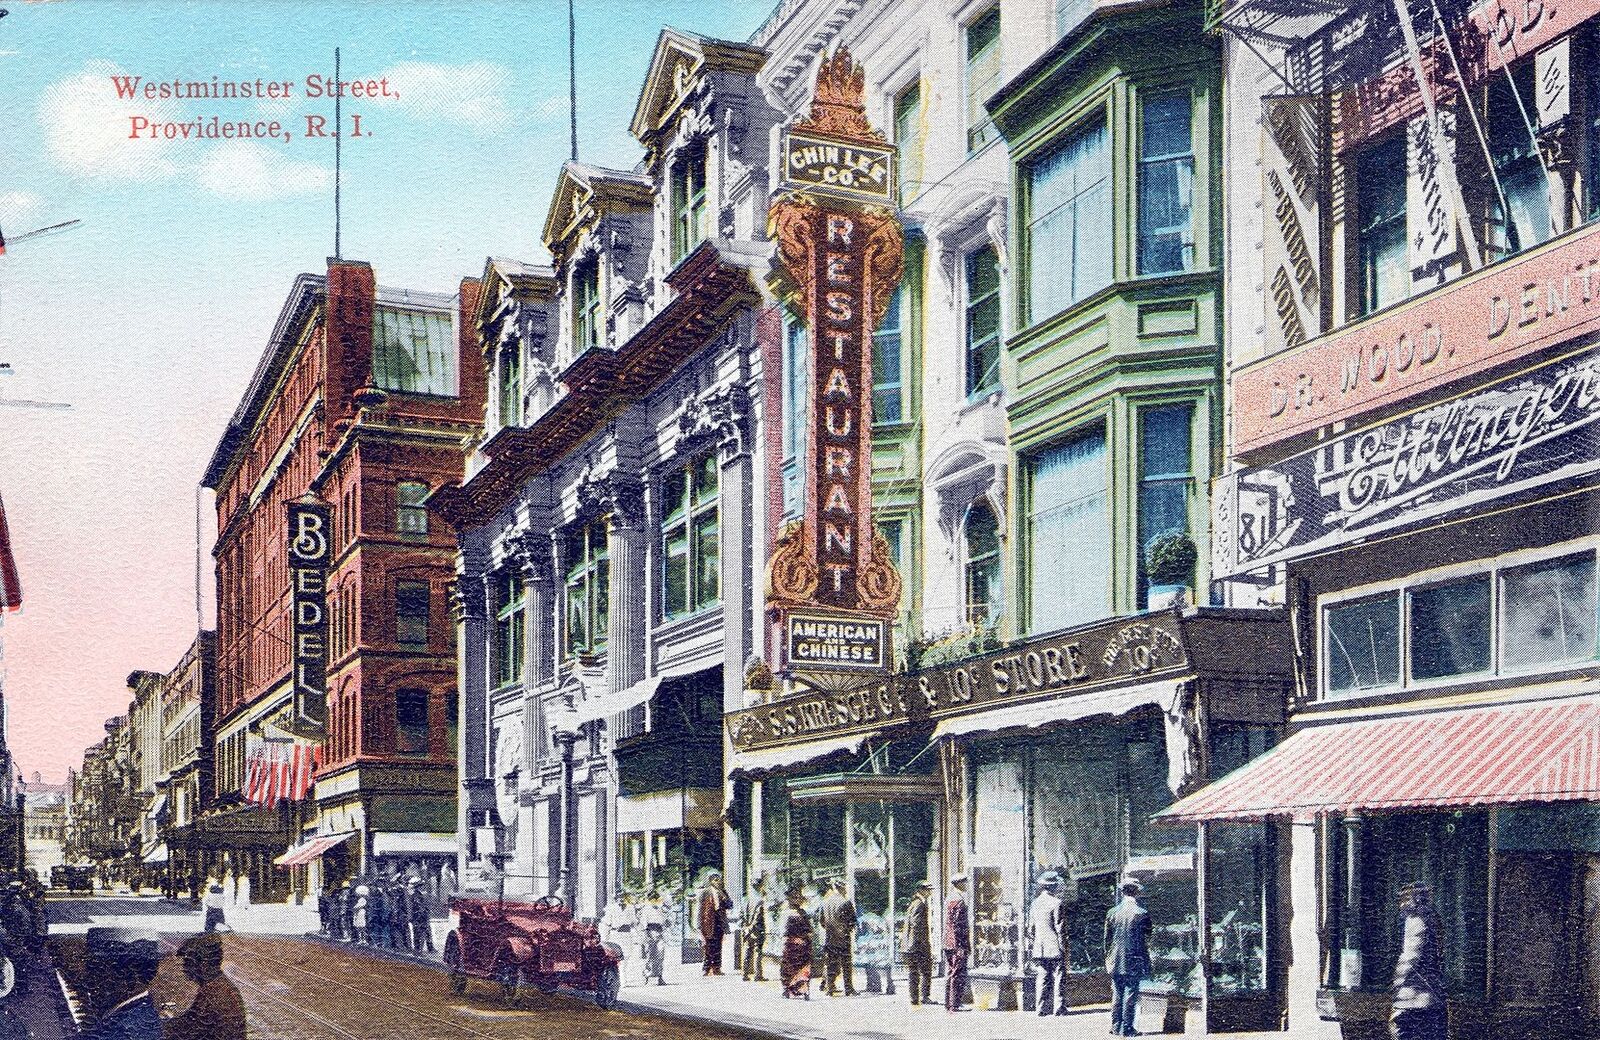 PROVIDENCE RI - Westminster Street Showing Stores Postcard